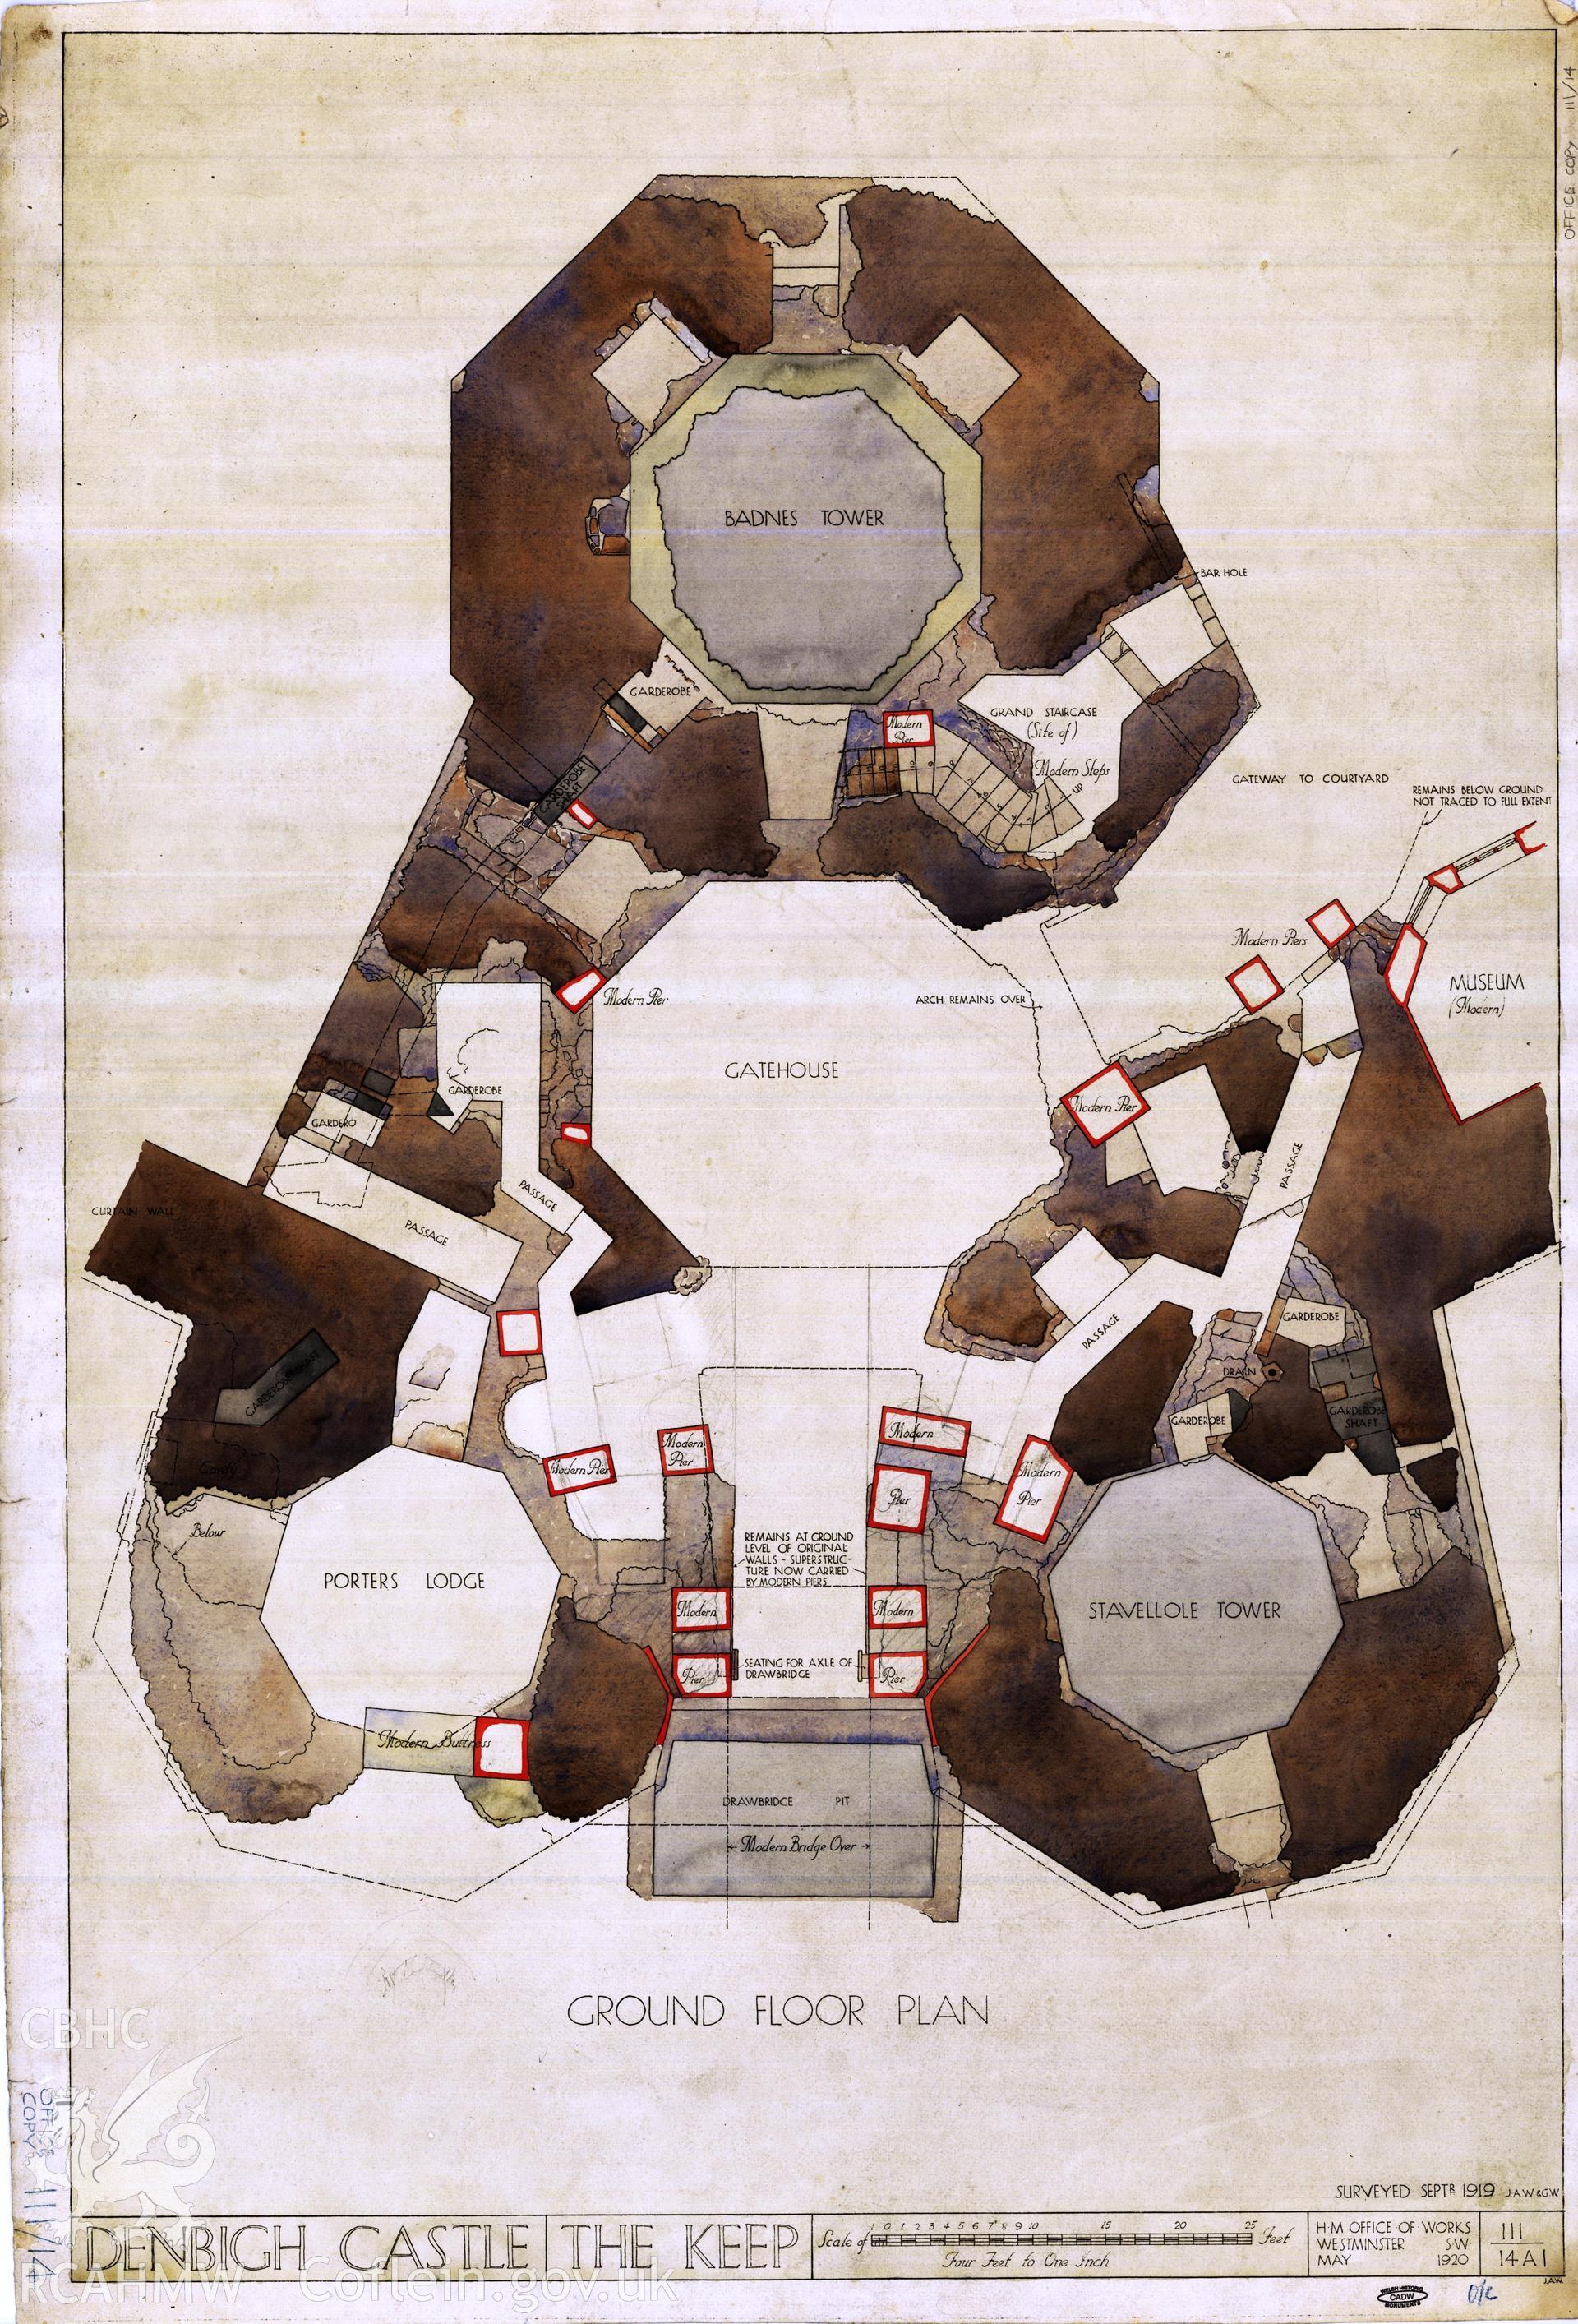 Cadw guardianship monument drawing of Denbigh Castle. T1, ground plan (tinted). Cadw Ref. No:111/14A1. Scale 1:48.